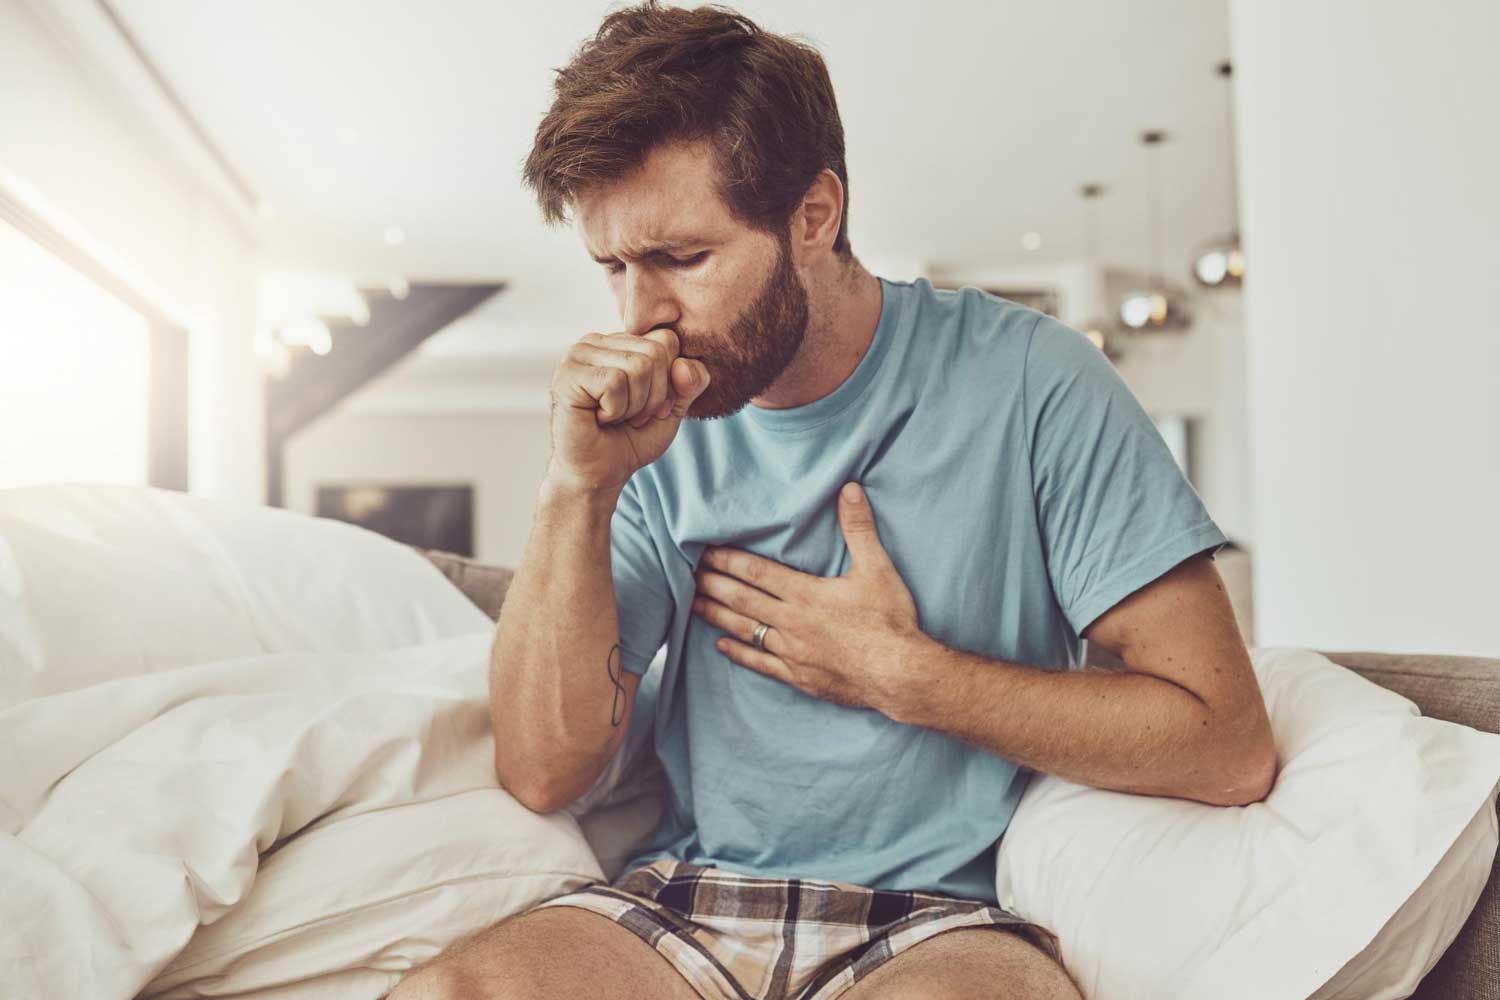 Sick coughing and man on a sofa with chest pain tuberculosis or influenza